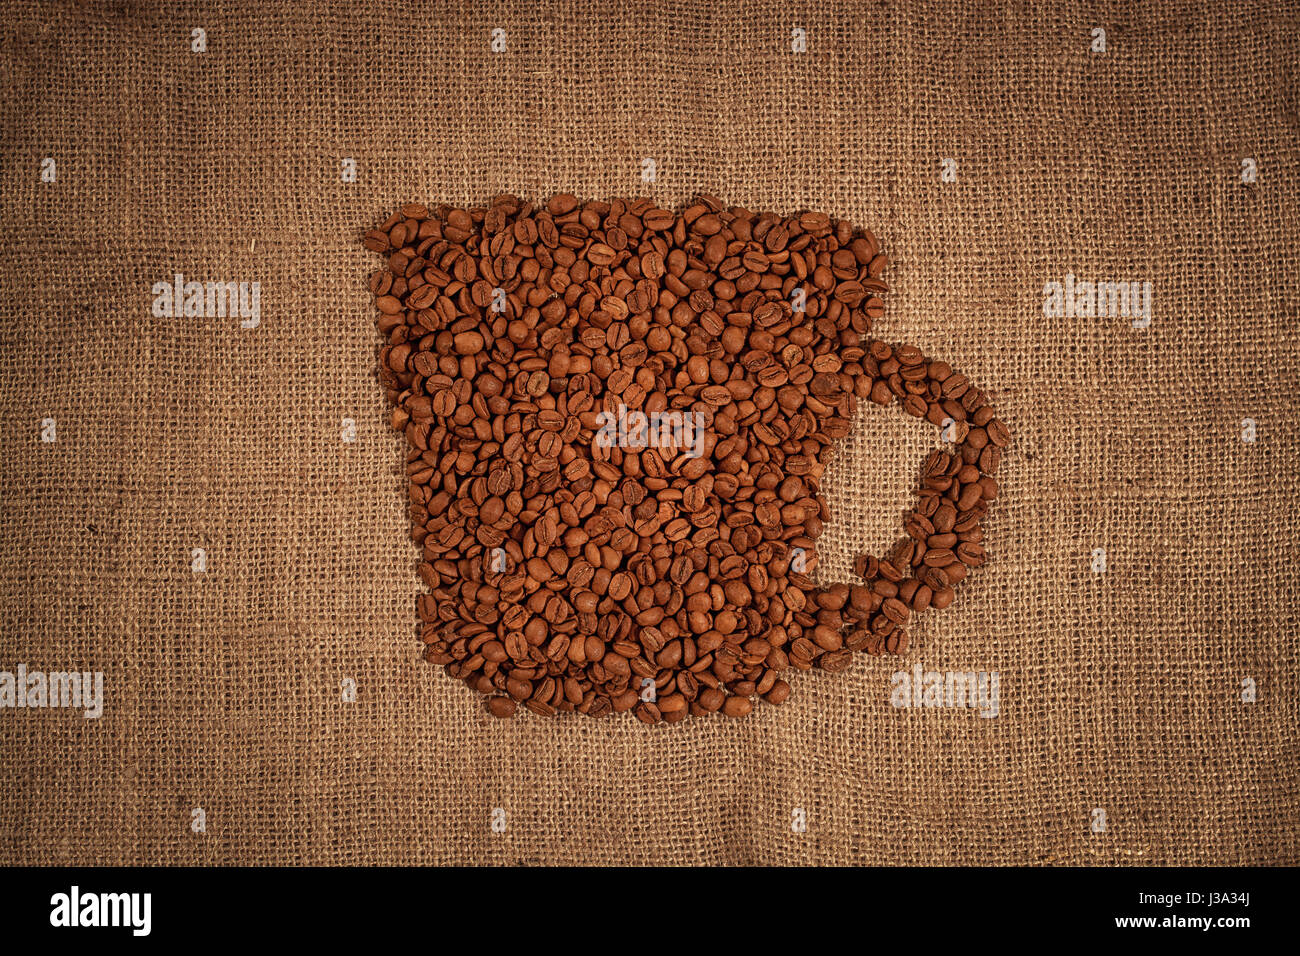 cup shaped Coffee beans texture Stock Photo